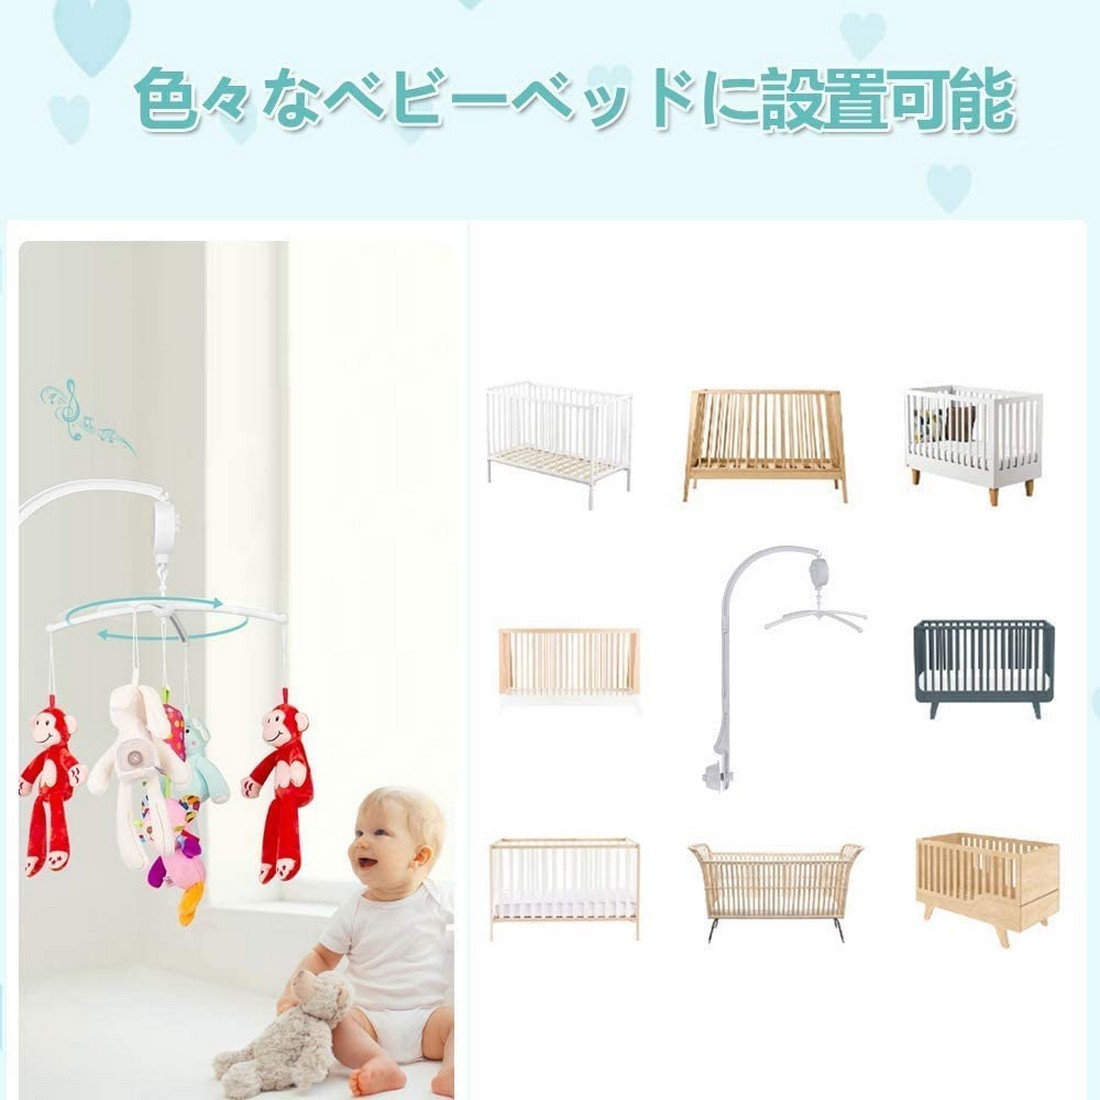  bed me Lee music box bracket arm bed me Lee for 360 times rotor ..me Lee goods for baby baby toy 